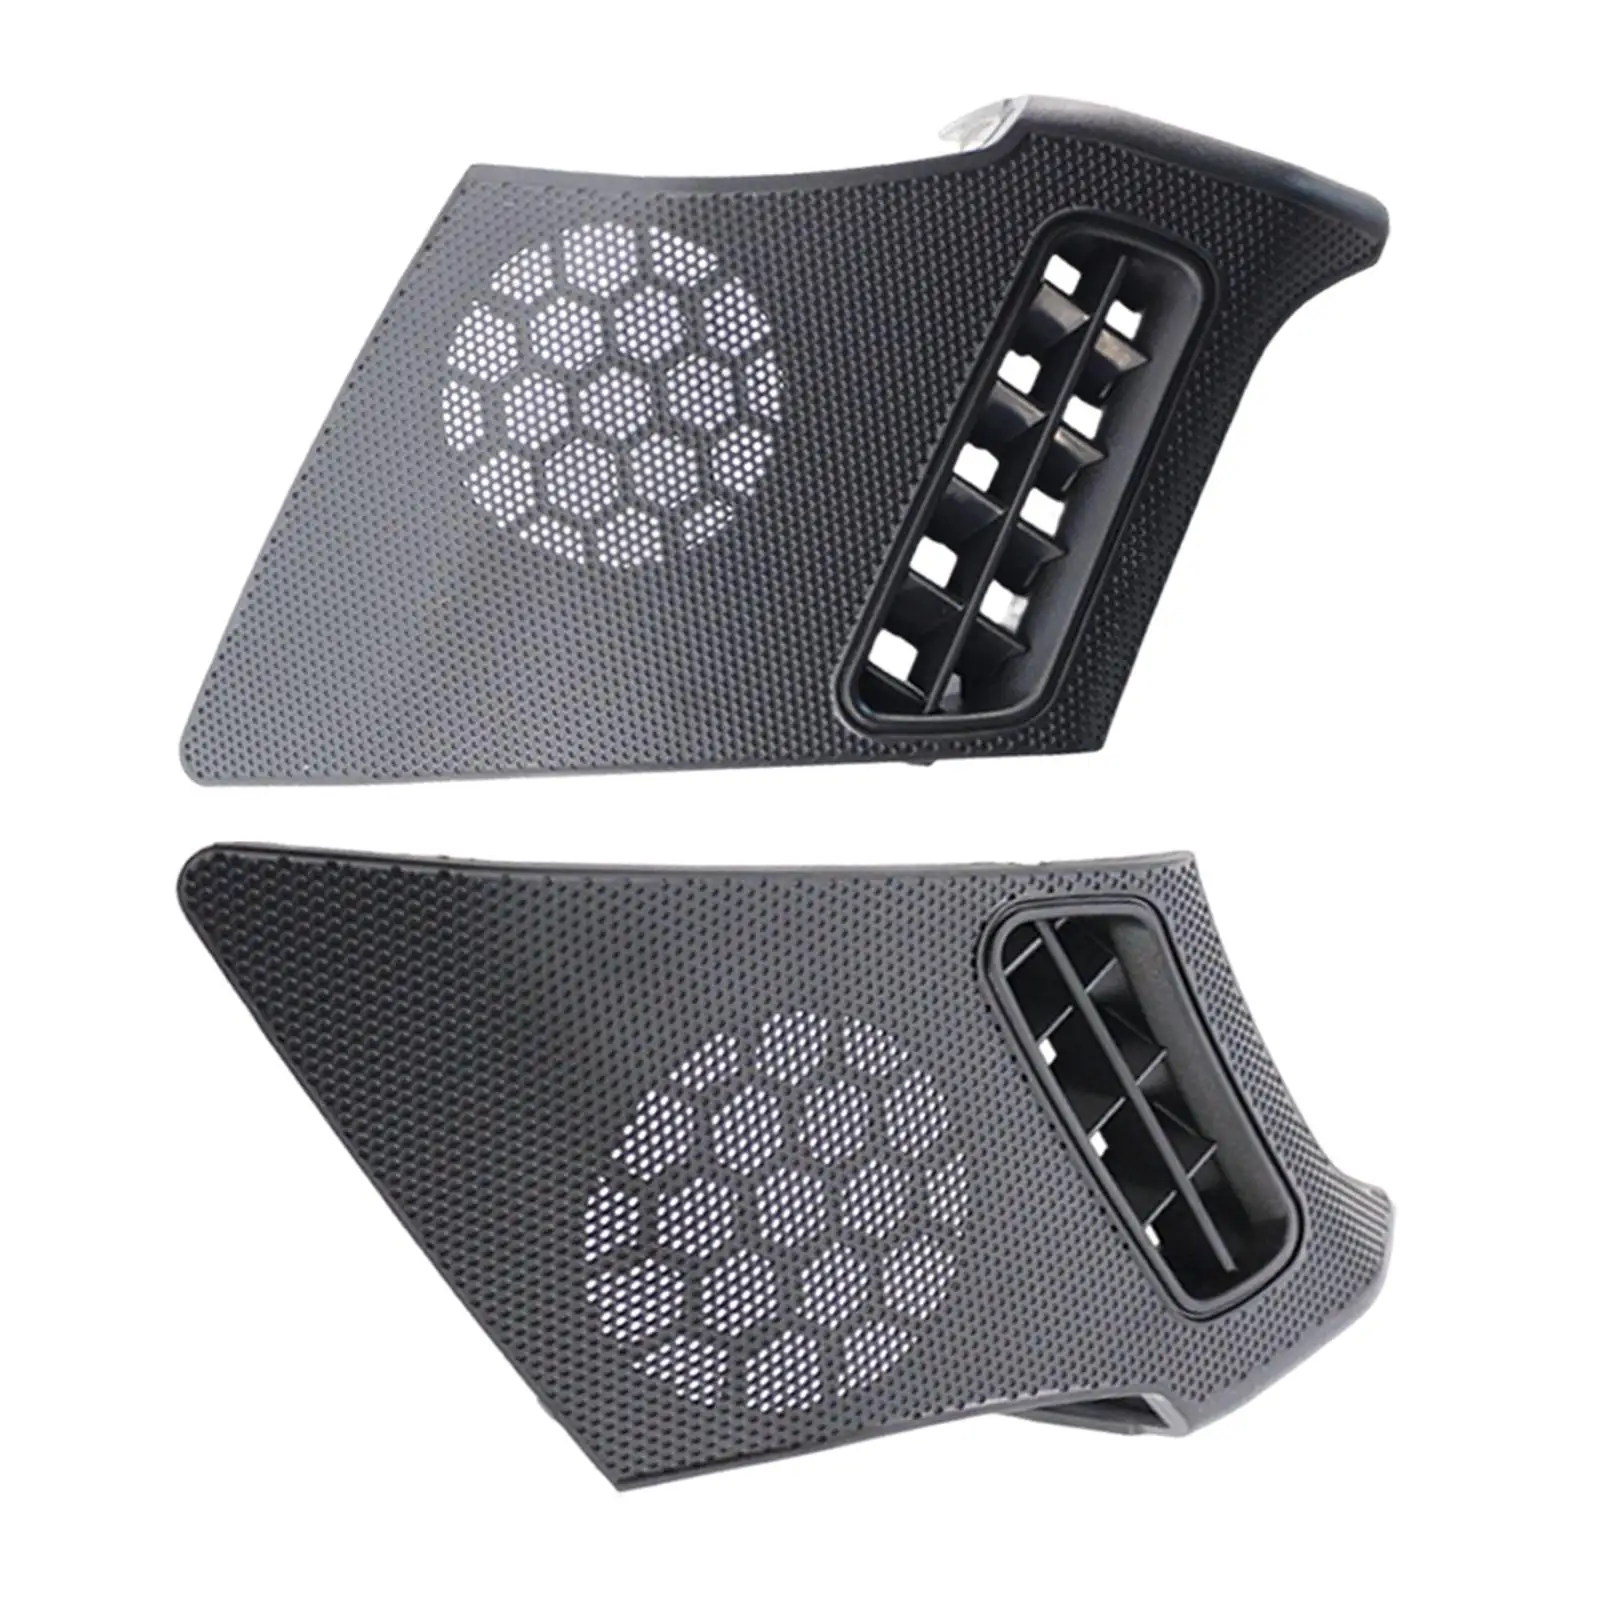  Board Air Vent Speaker Grill Covers Protective Professional Car Accessories